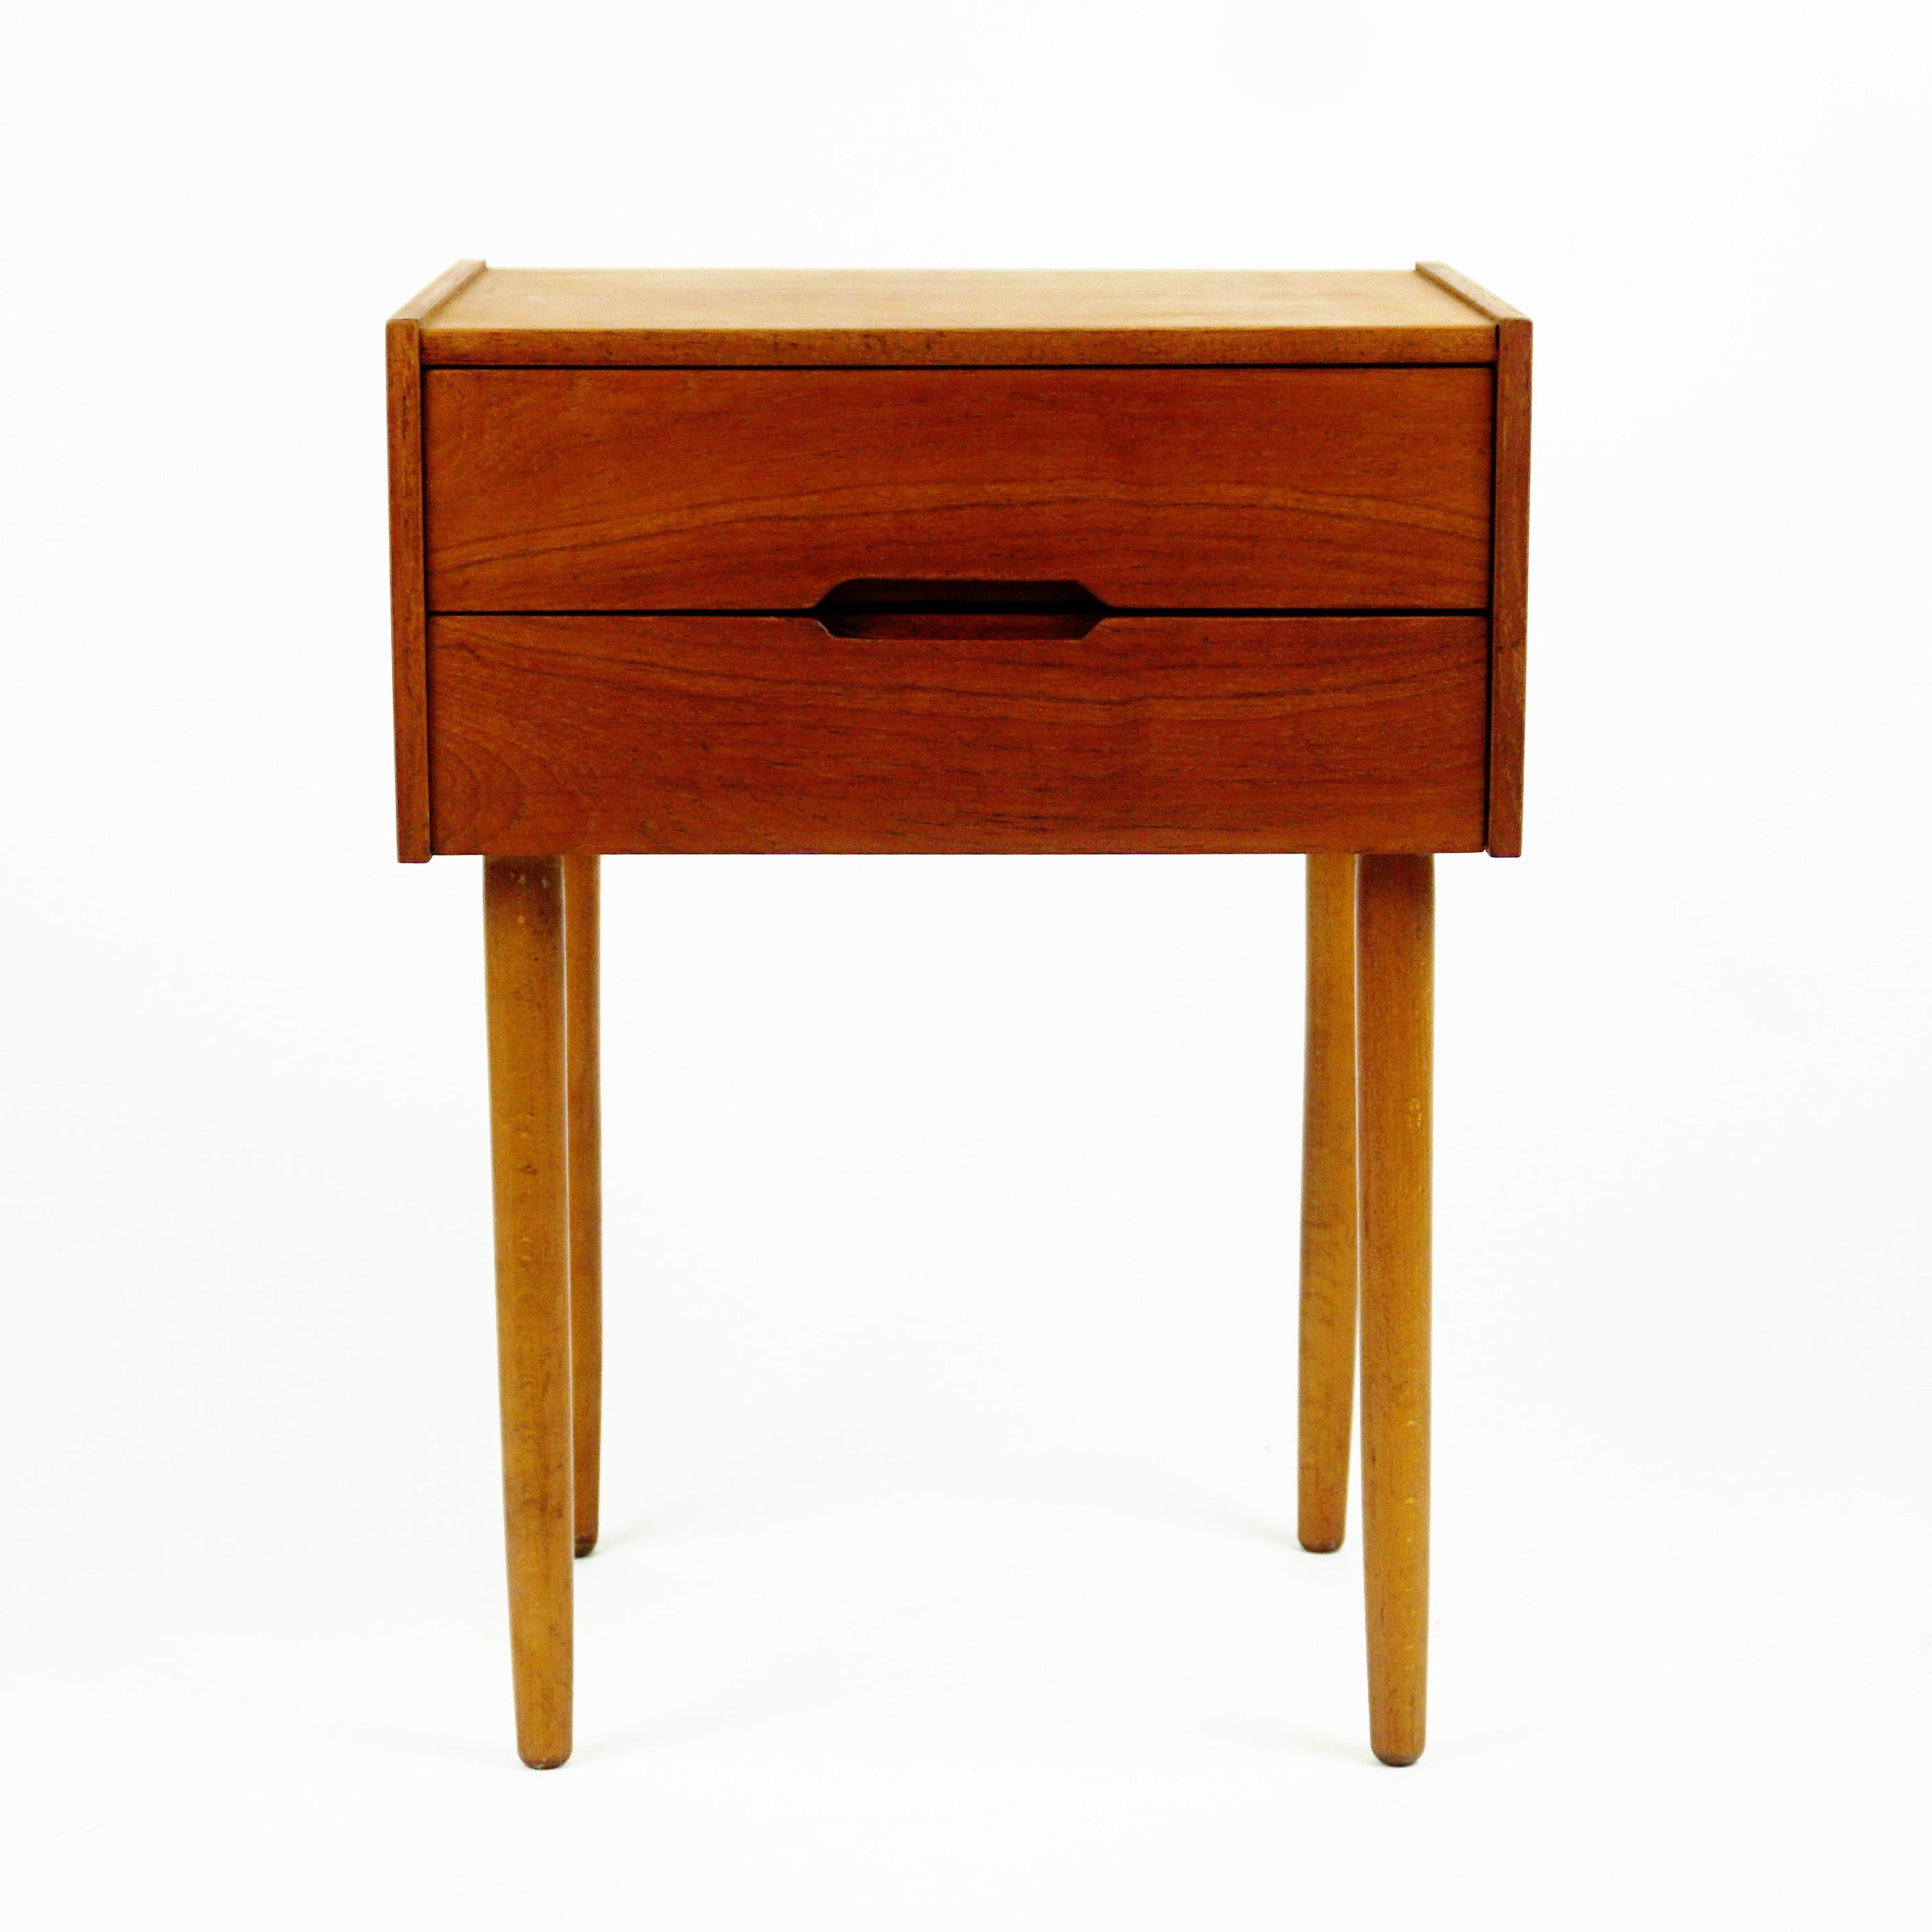 Charming Scandinavian modern chest of drawers manufactured by Aksel Kjersgaard, Odder, Denmark 1960s.
This excellent small piece of Furniture features two drawers. 
It can be used as a nightstand or as well in the wardrobe. 
Authentic example for